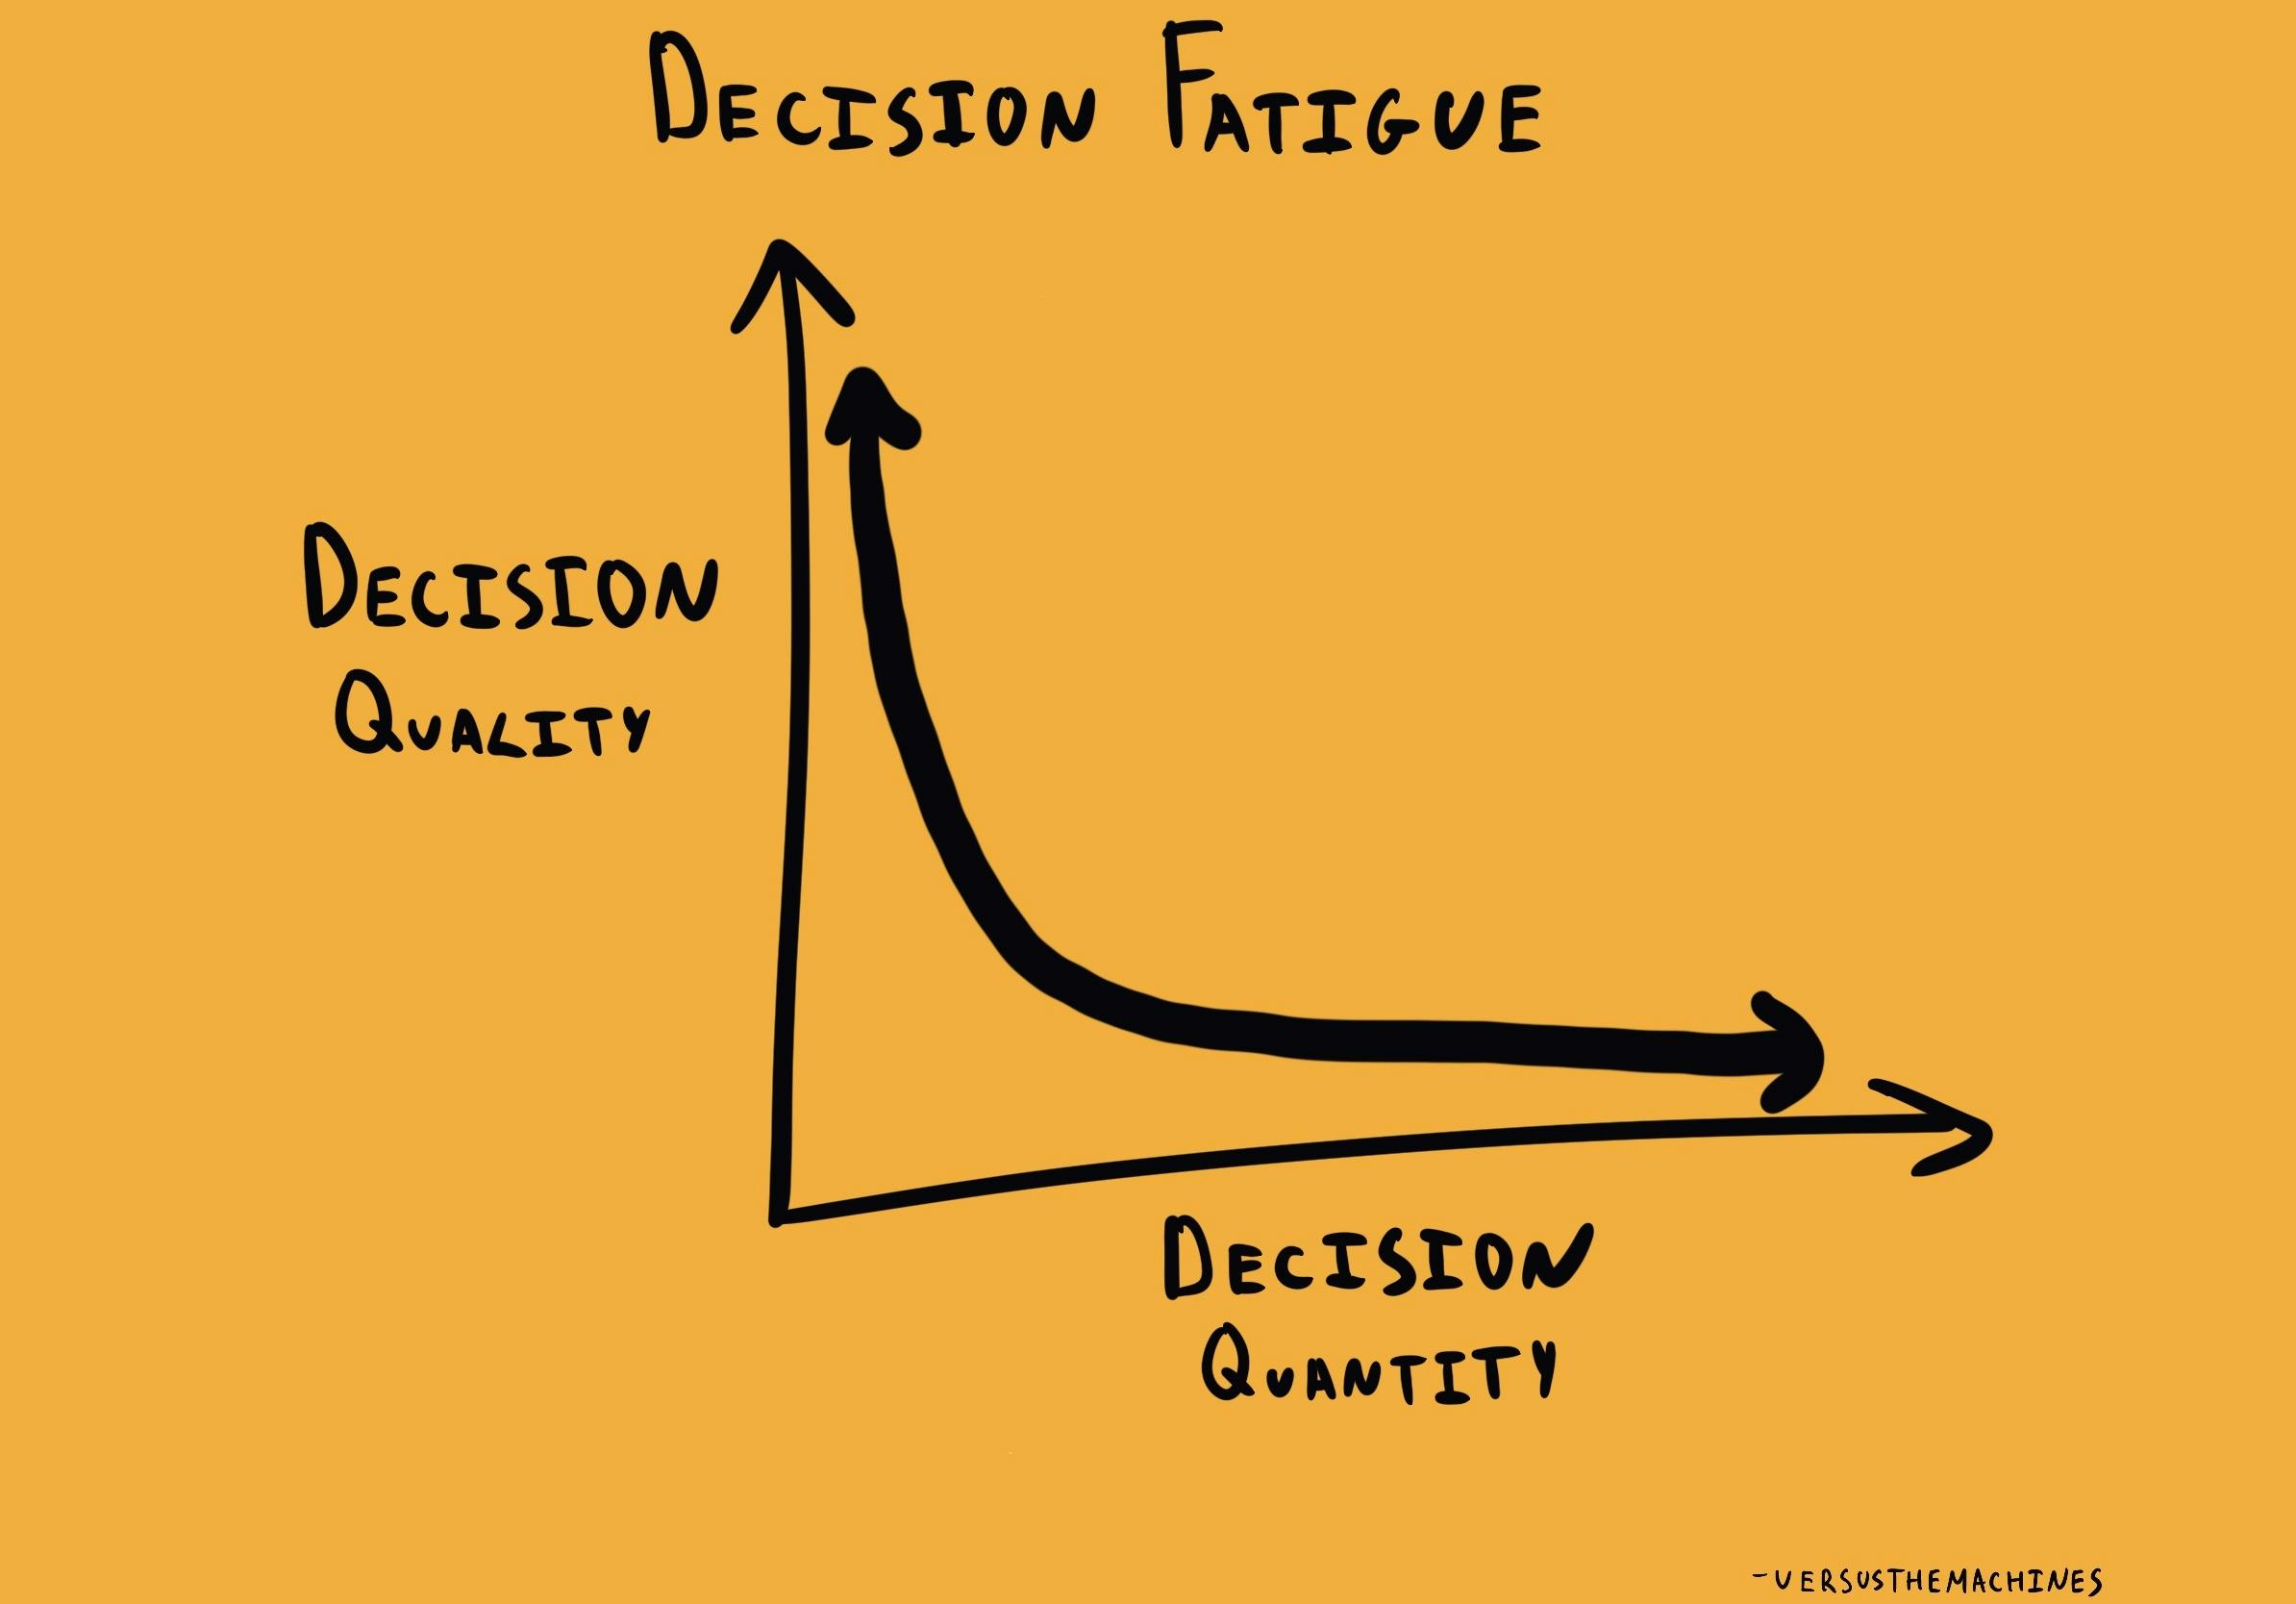 System 1 & System 2: Why Do We Make Irrational Decisions (Cognitive Biases  In A Nutshell) 